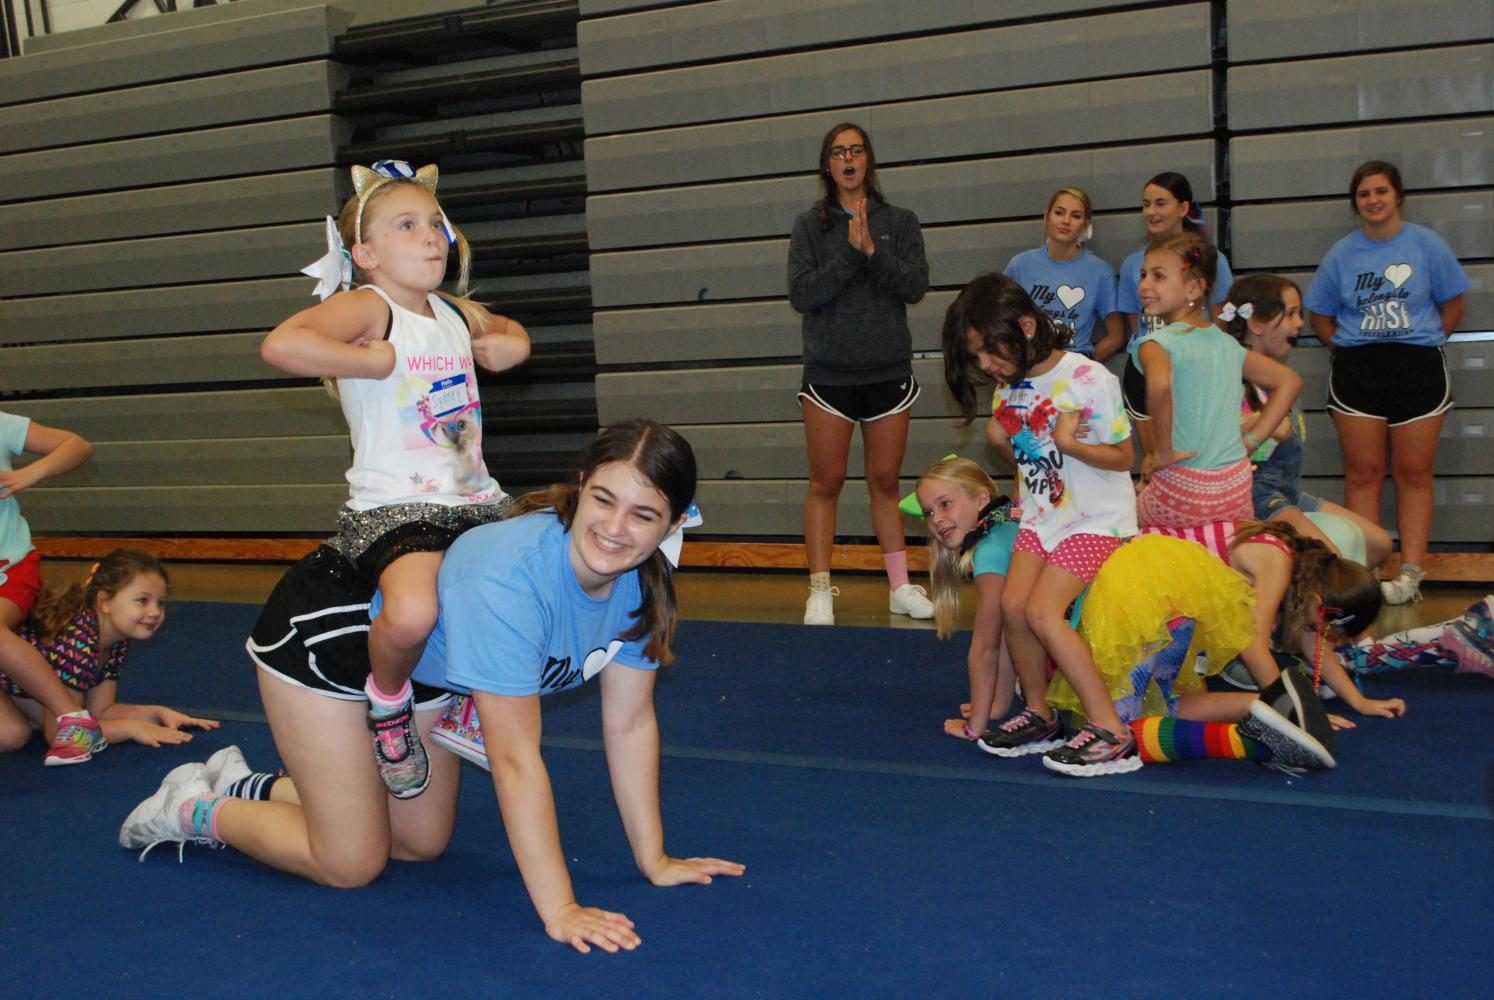 Sophomore Annie Tromboli hangs out with some young cheerleaders during break. She volunteered this summer at Hagertys Youth Cheer Camp.